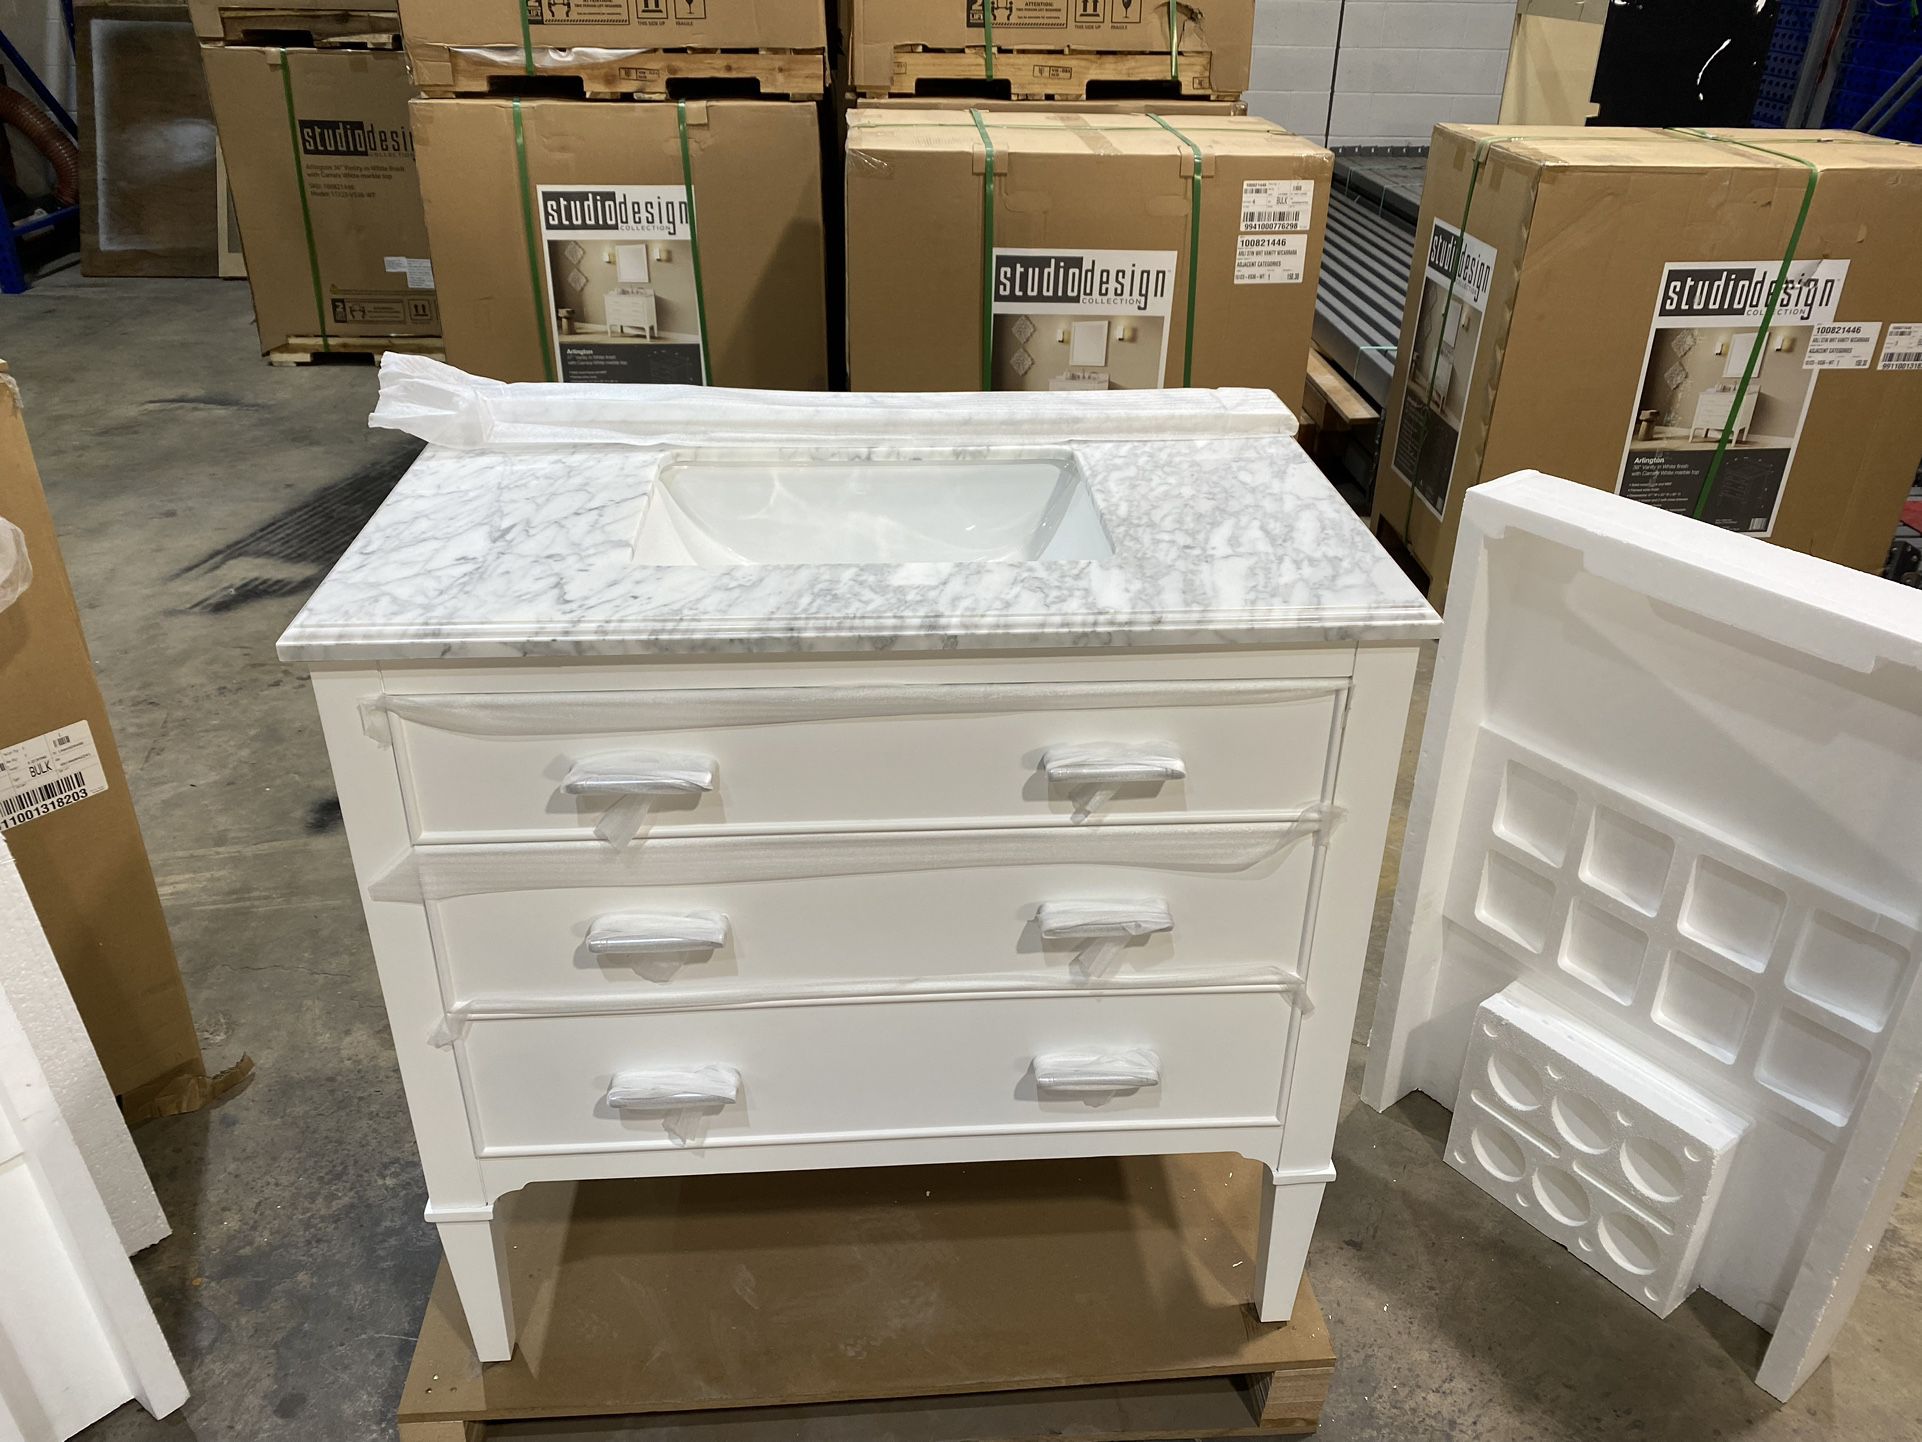 ARLINGTON 37” VANITY in White Finish with Carrara White Marble Top